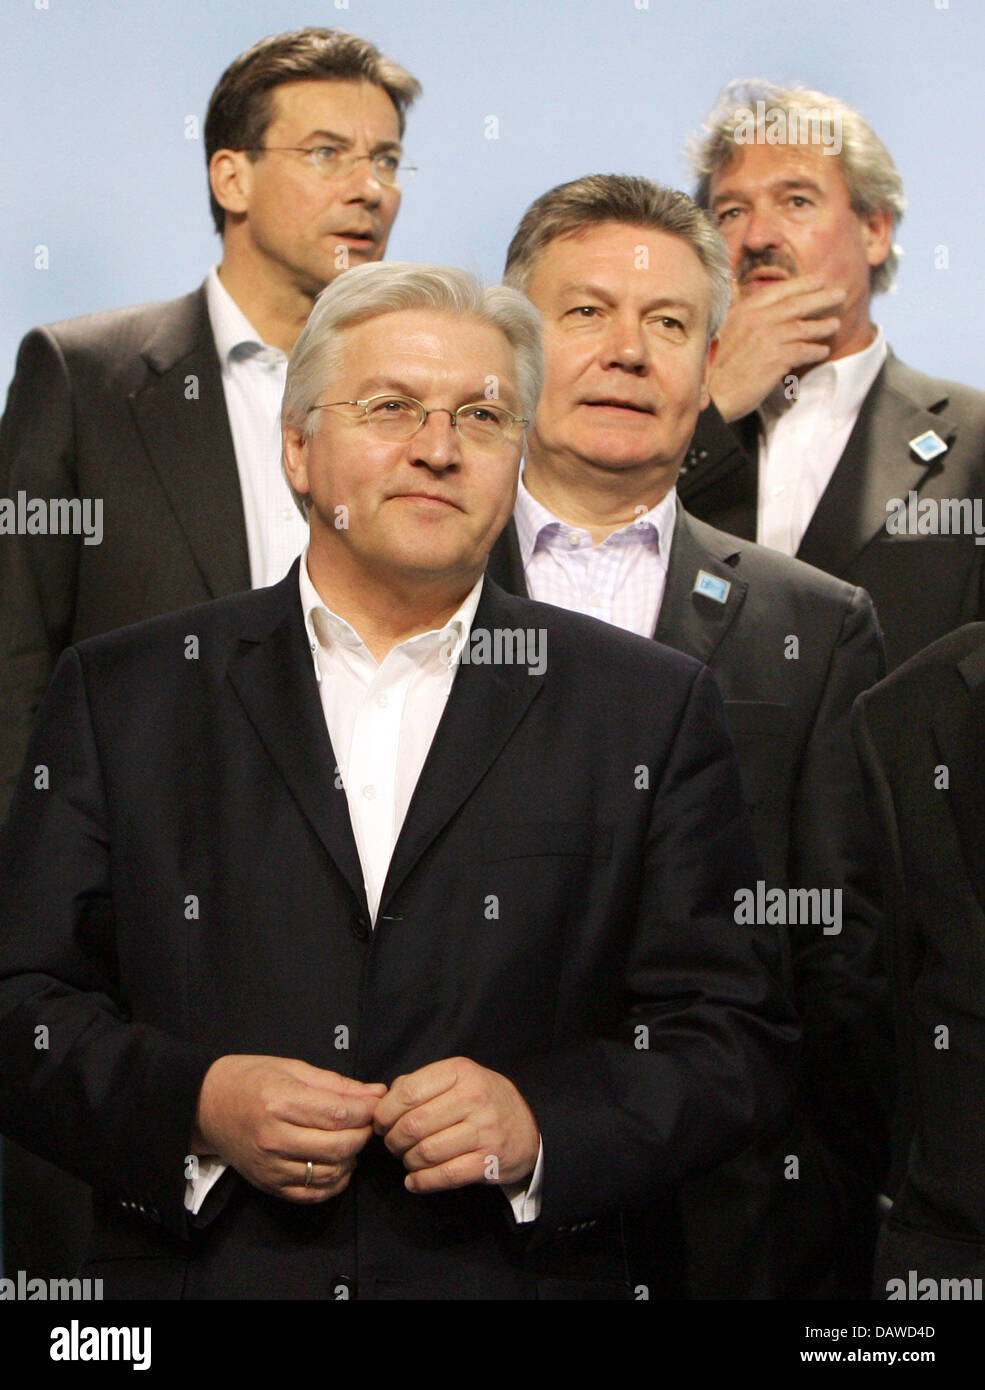 German Foreign Minister Frank-Walter Steinmeier (front) pictured with Foreign Ministers (L-R) Maxime Verhagen (Netherlands), Karel de Gucht (Belgium), and Jean Asselborn (Luxembourg) at the group photo at the EU foreign ministers meeeting in Bremen, Germany, Saturday, 31 March 2007. The representatives for foreign affairs of the 27 EU member states held an informal meeting in Breme Stock Photo